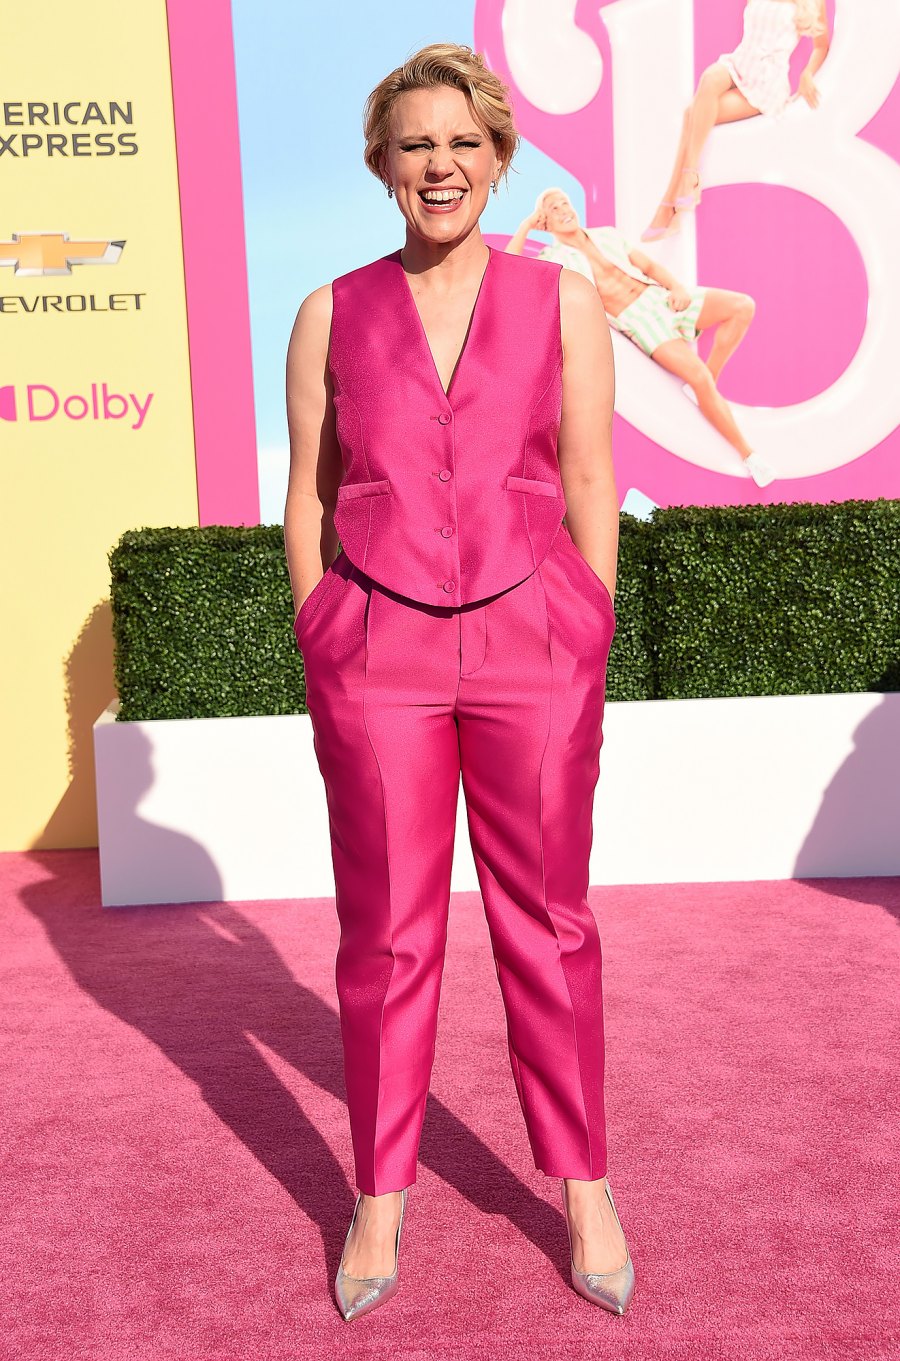 Barbiecore! See Anne Hathaway, Ciara, Kim Kardashian and More Rock the Head-to-Toe Hot Pink Trend gallery